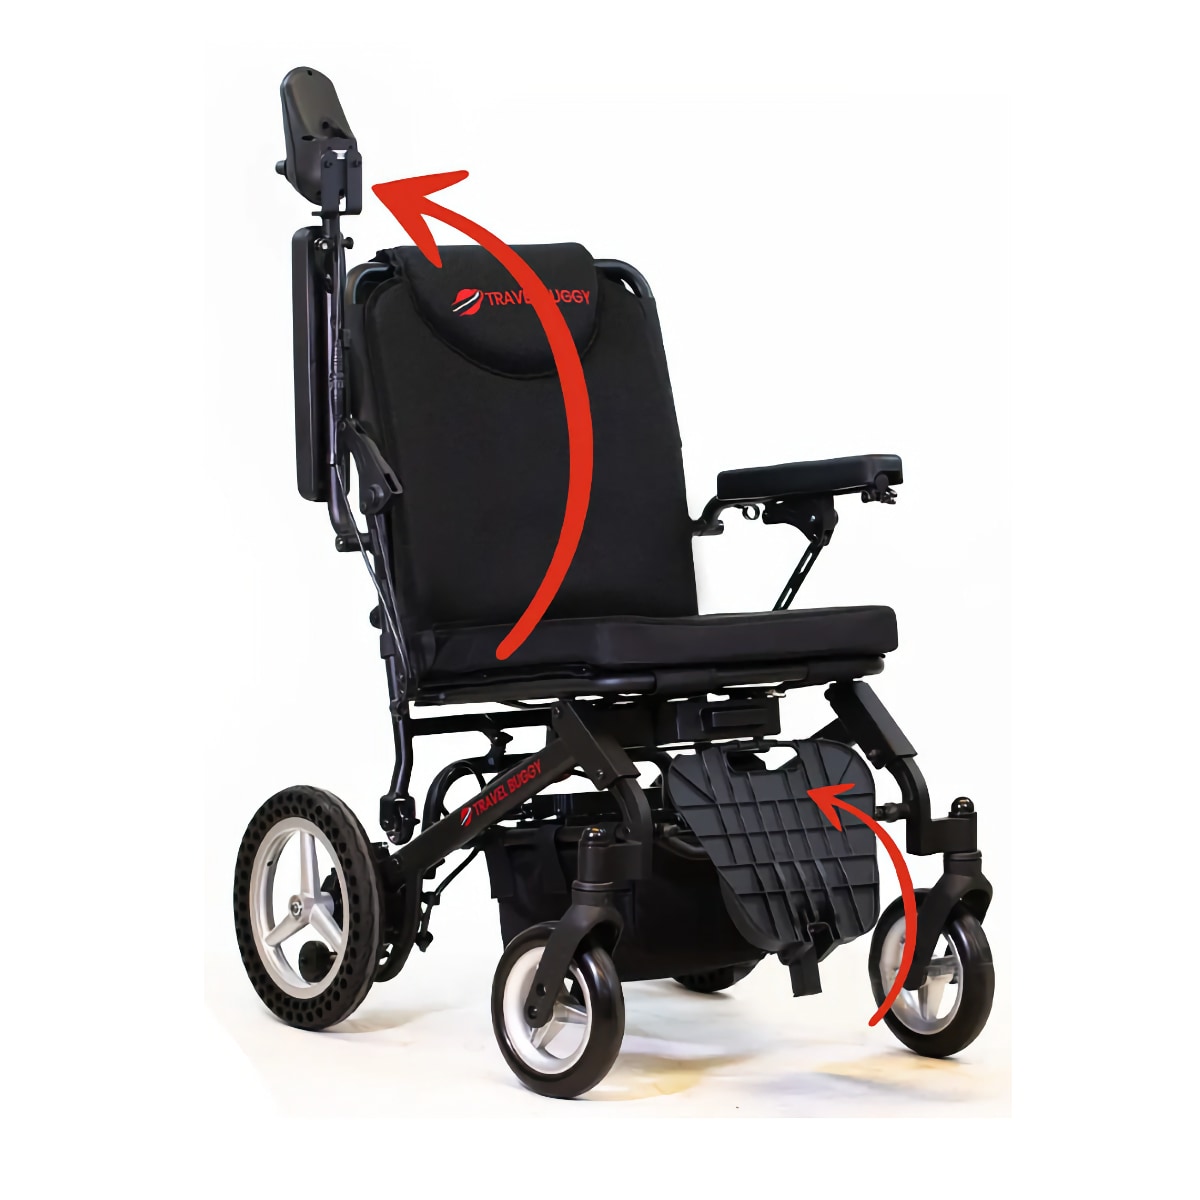 Travel Buggy Dash power wheelchair with arm raised